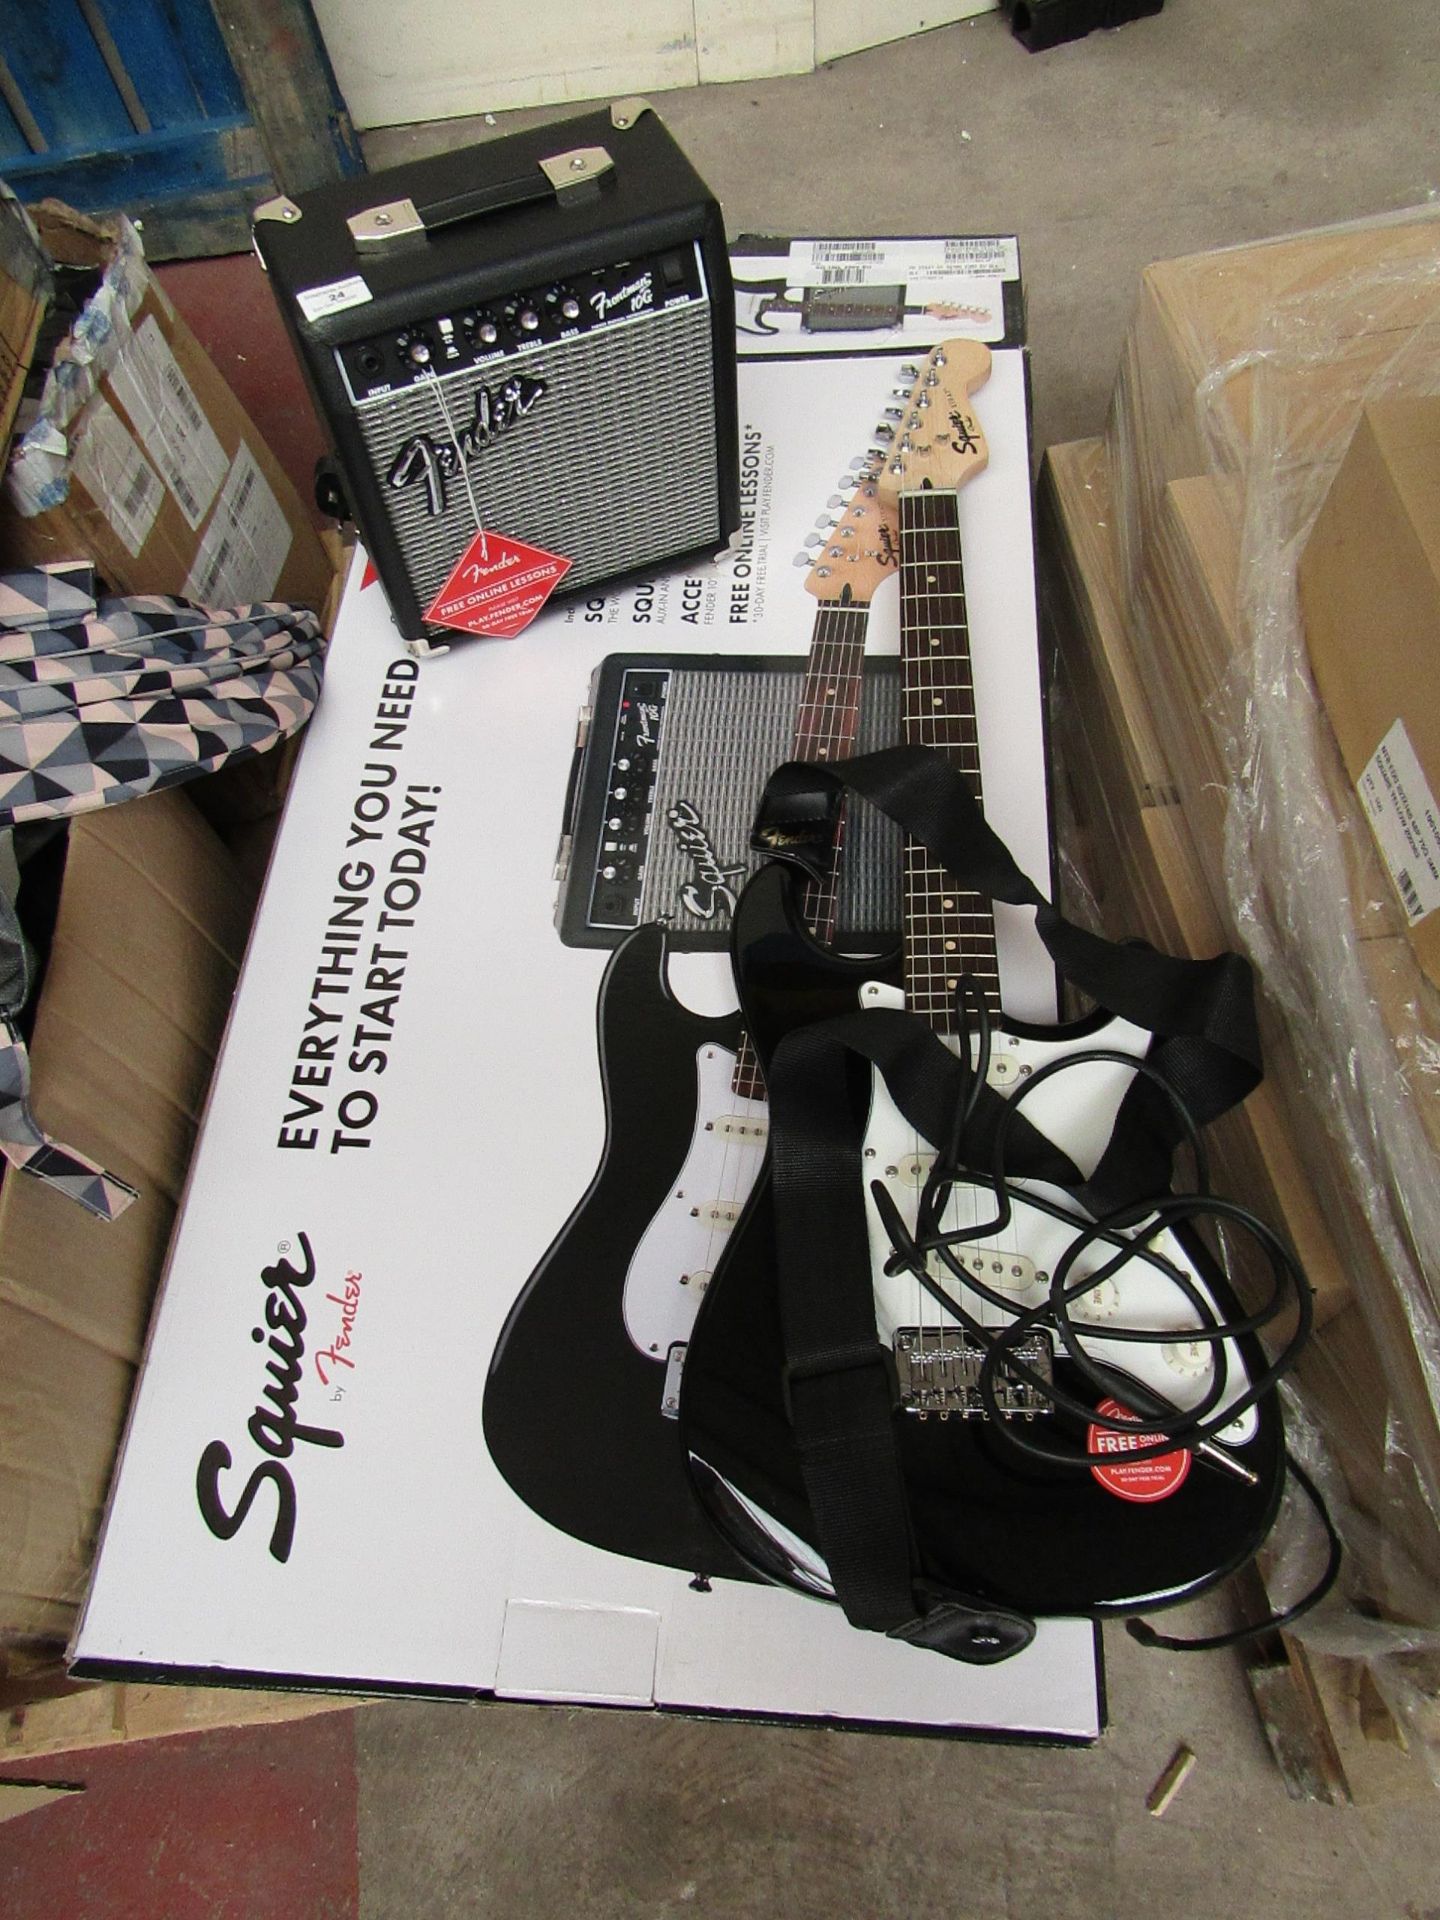 Fender Squier Frontman 10G Amp & Guitar. Boxed but Untested. Comes with Power Cable & Lead. RRP £